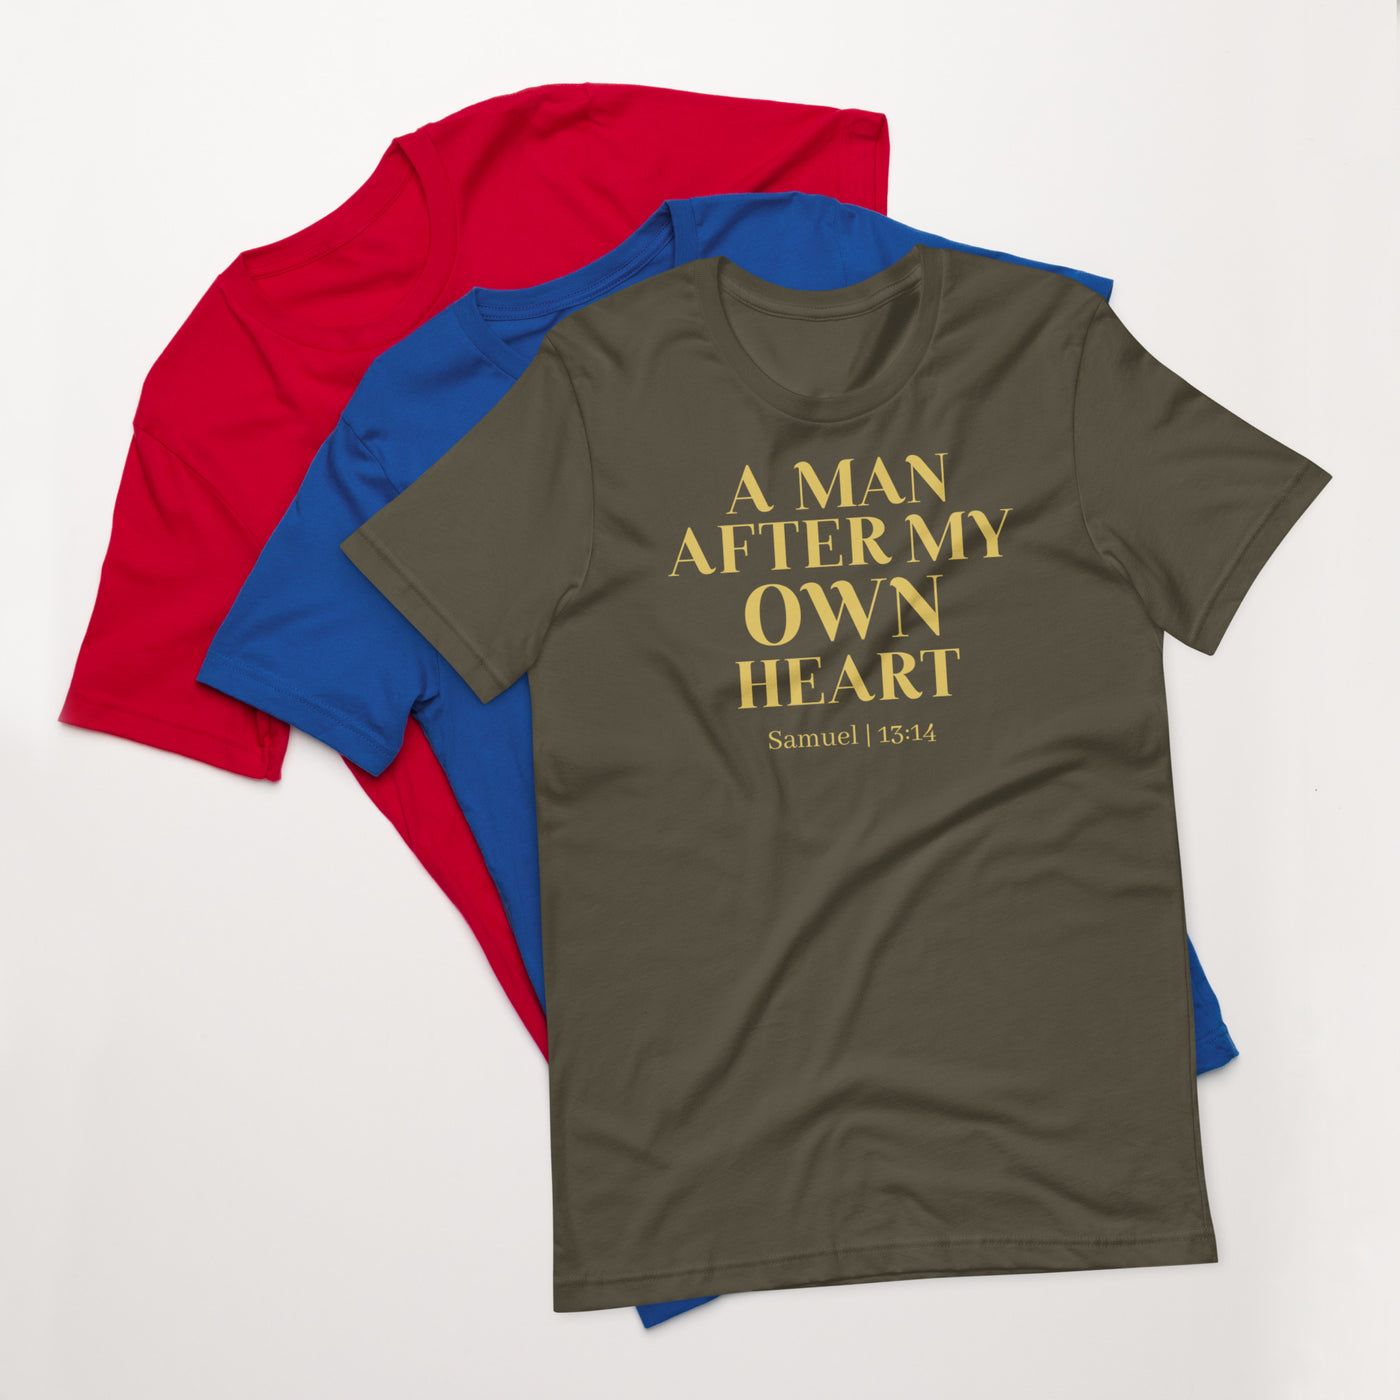 Men's Short Sleeve T-Shirts | Faith and Happiness Store